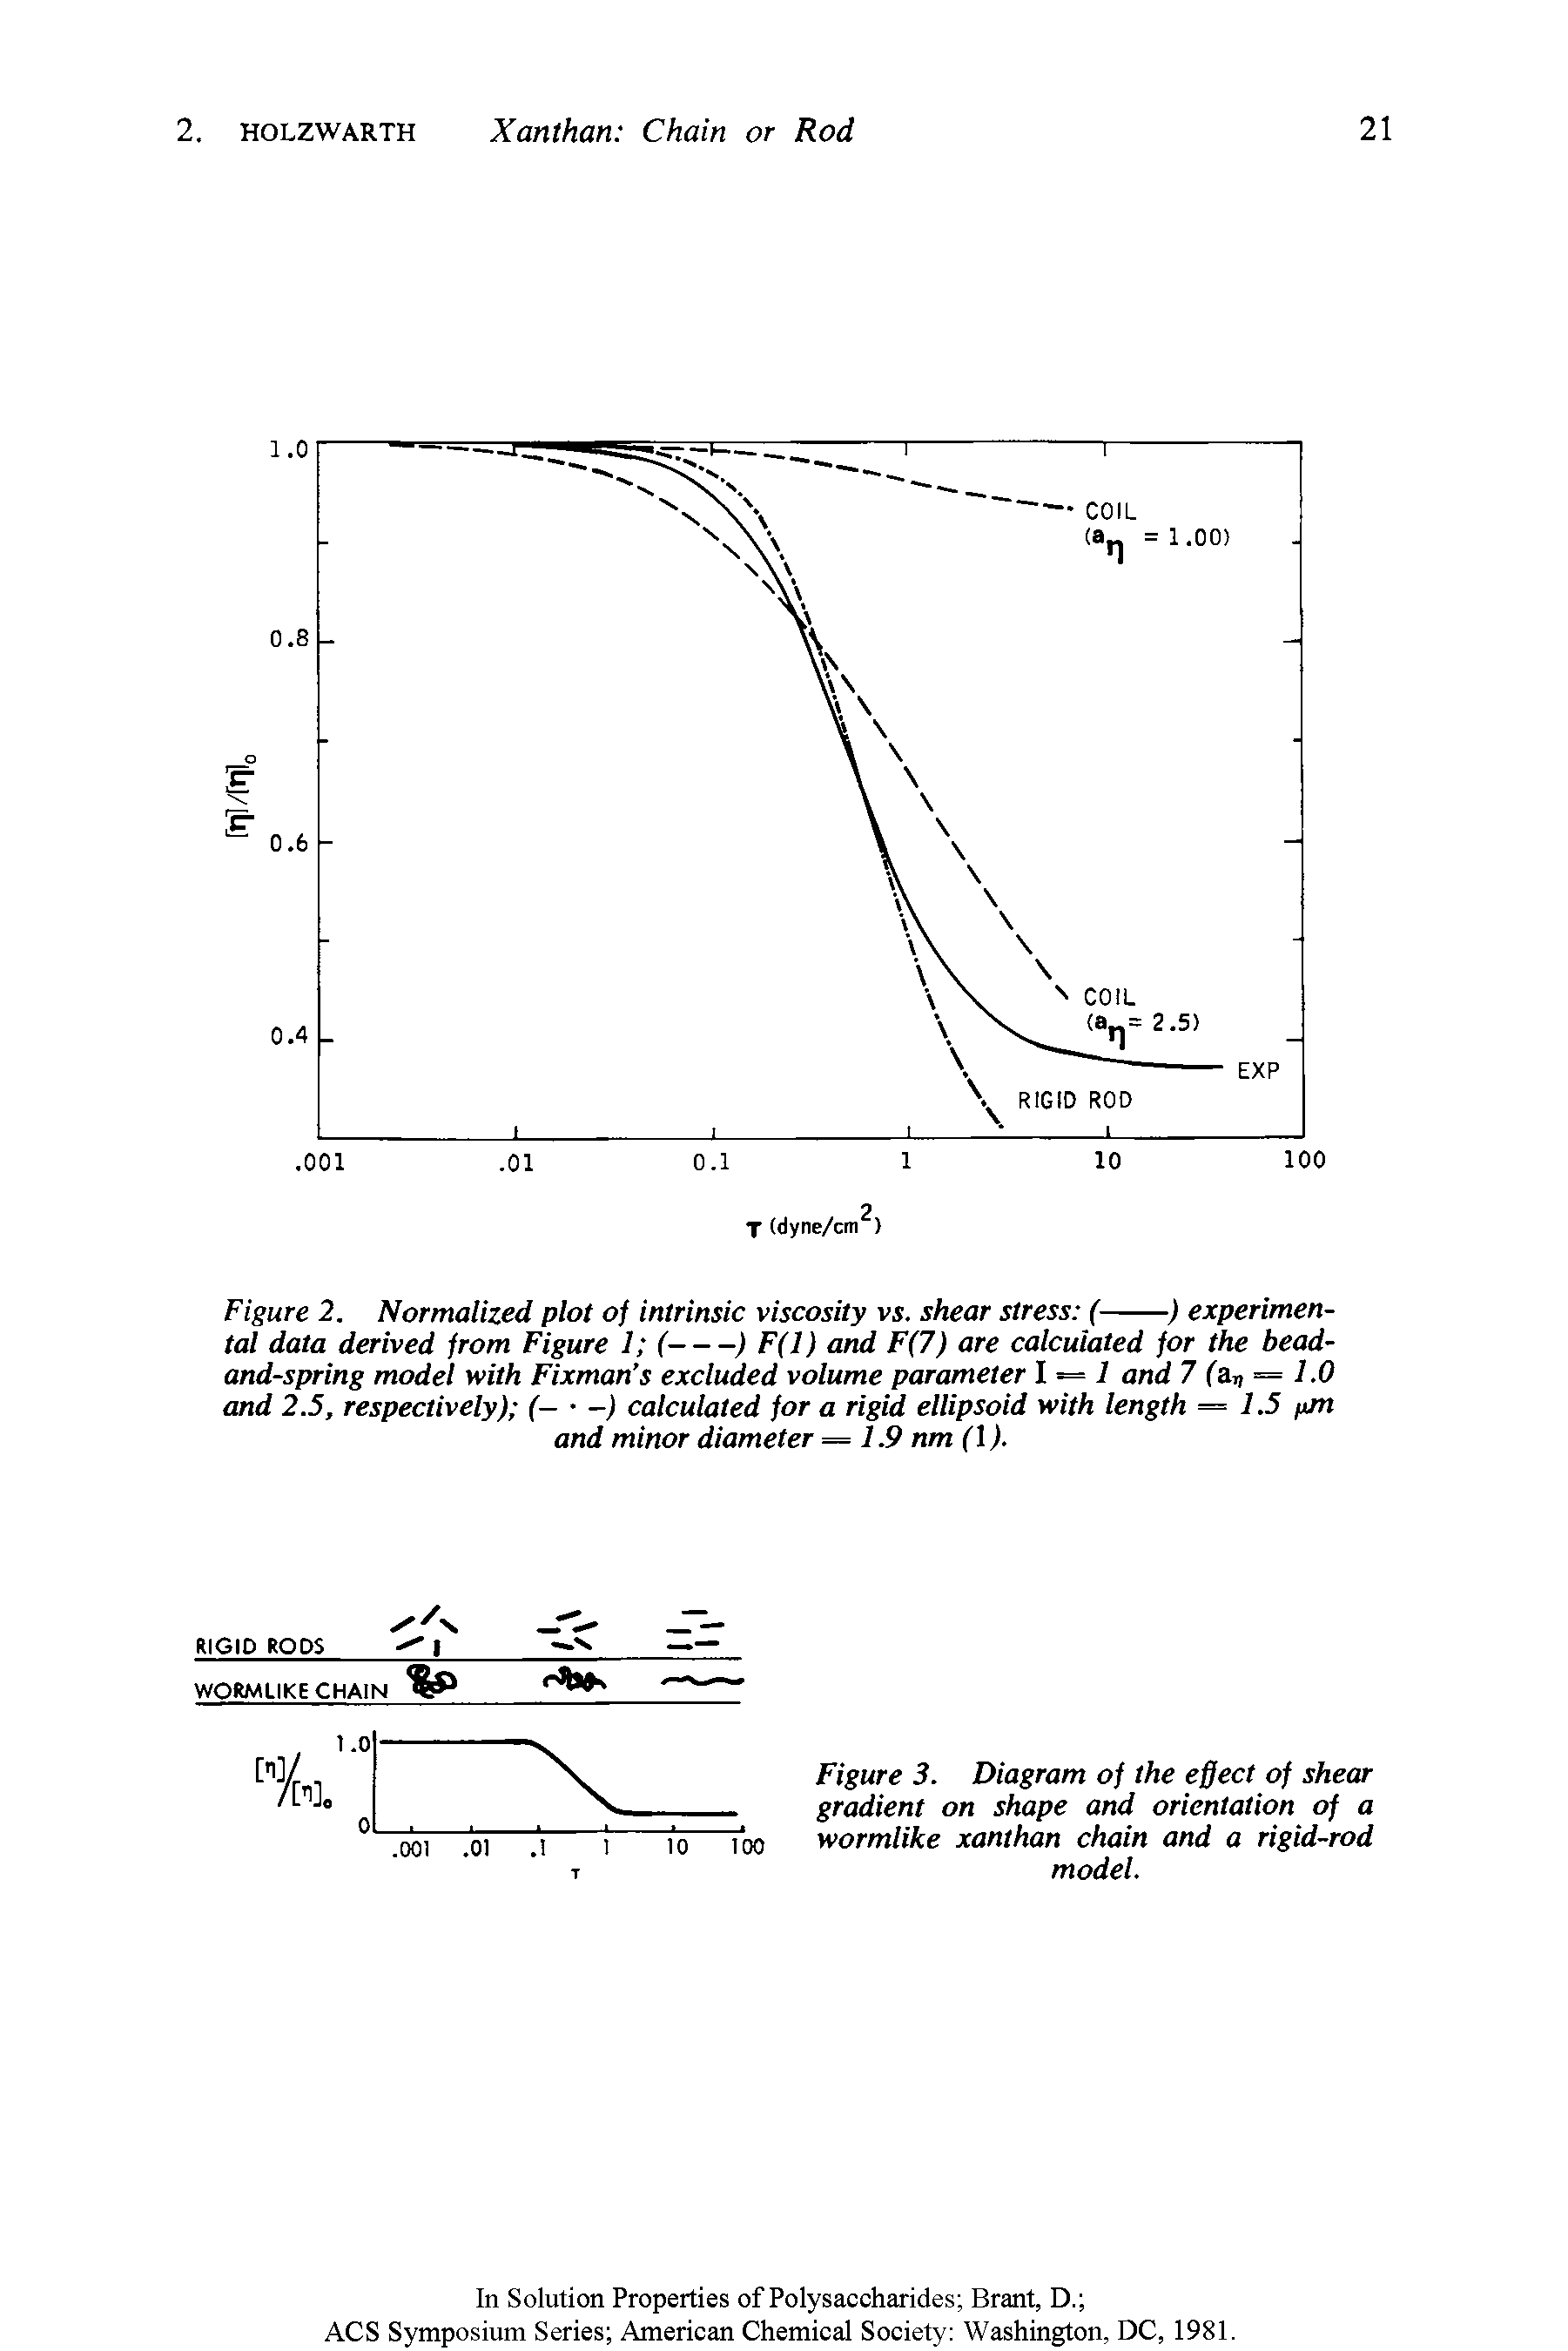 Figure 3. Diagram of the effect of shear gradient on shape and orientation of a wormlike xanthan chain and a rigid-rod model.